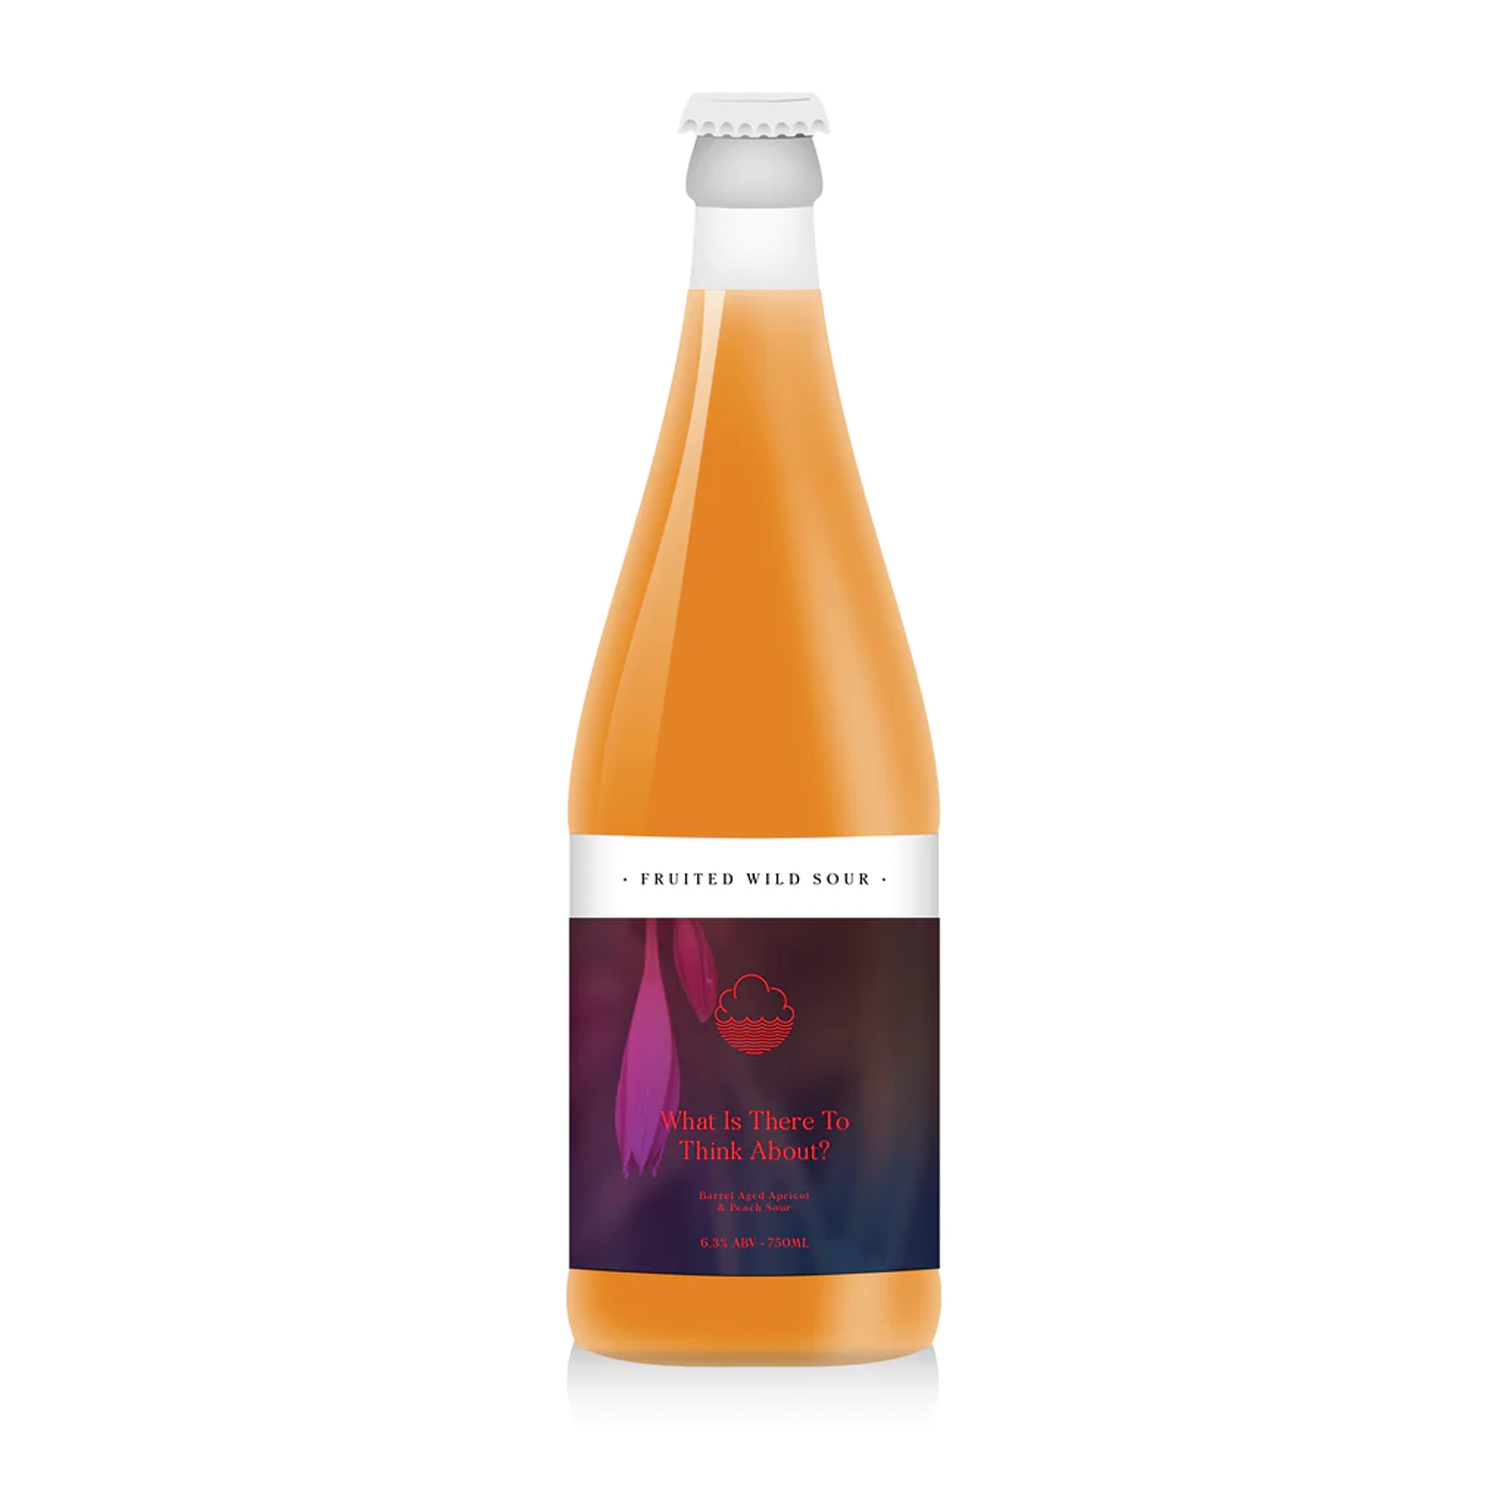 Cloudwater What Is There To Think About? Fruited Wild Sour